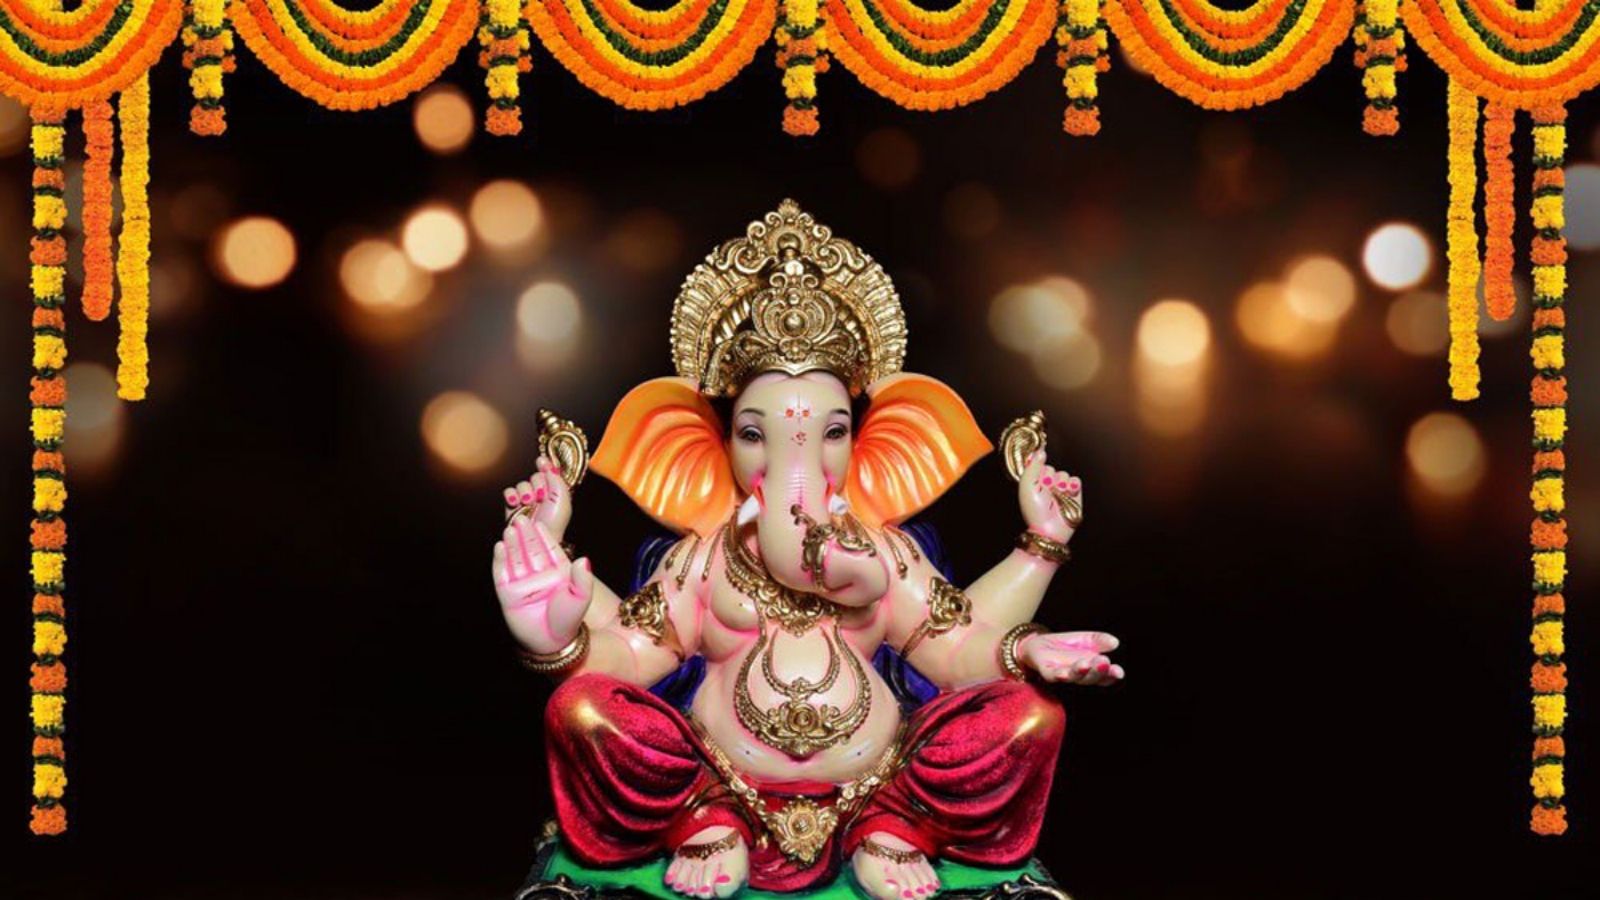 If there is a girl worthy of marriage at home, you can offer Malpoya to worship Ganesha